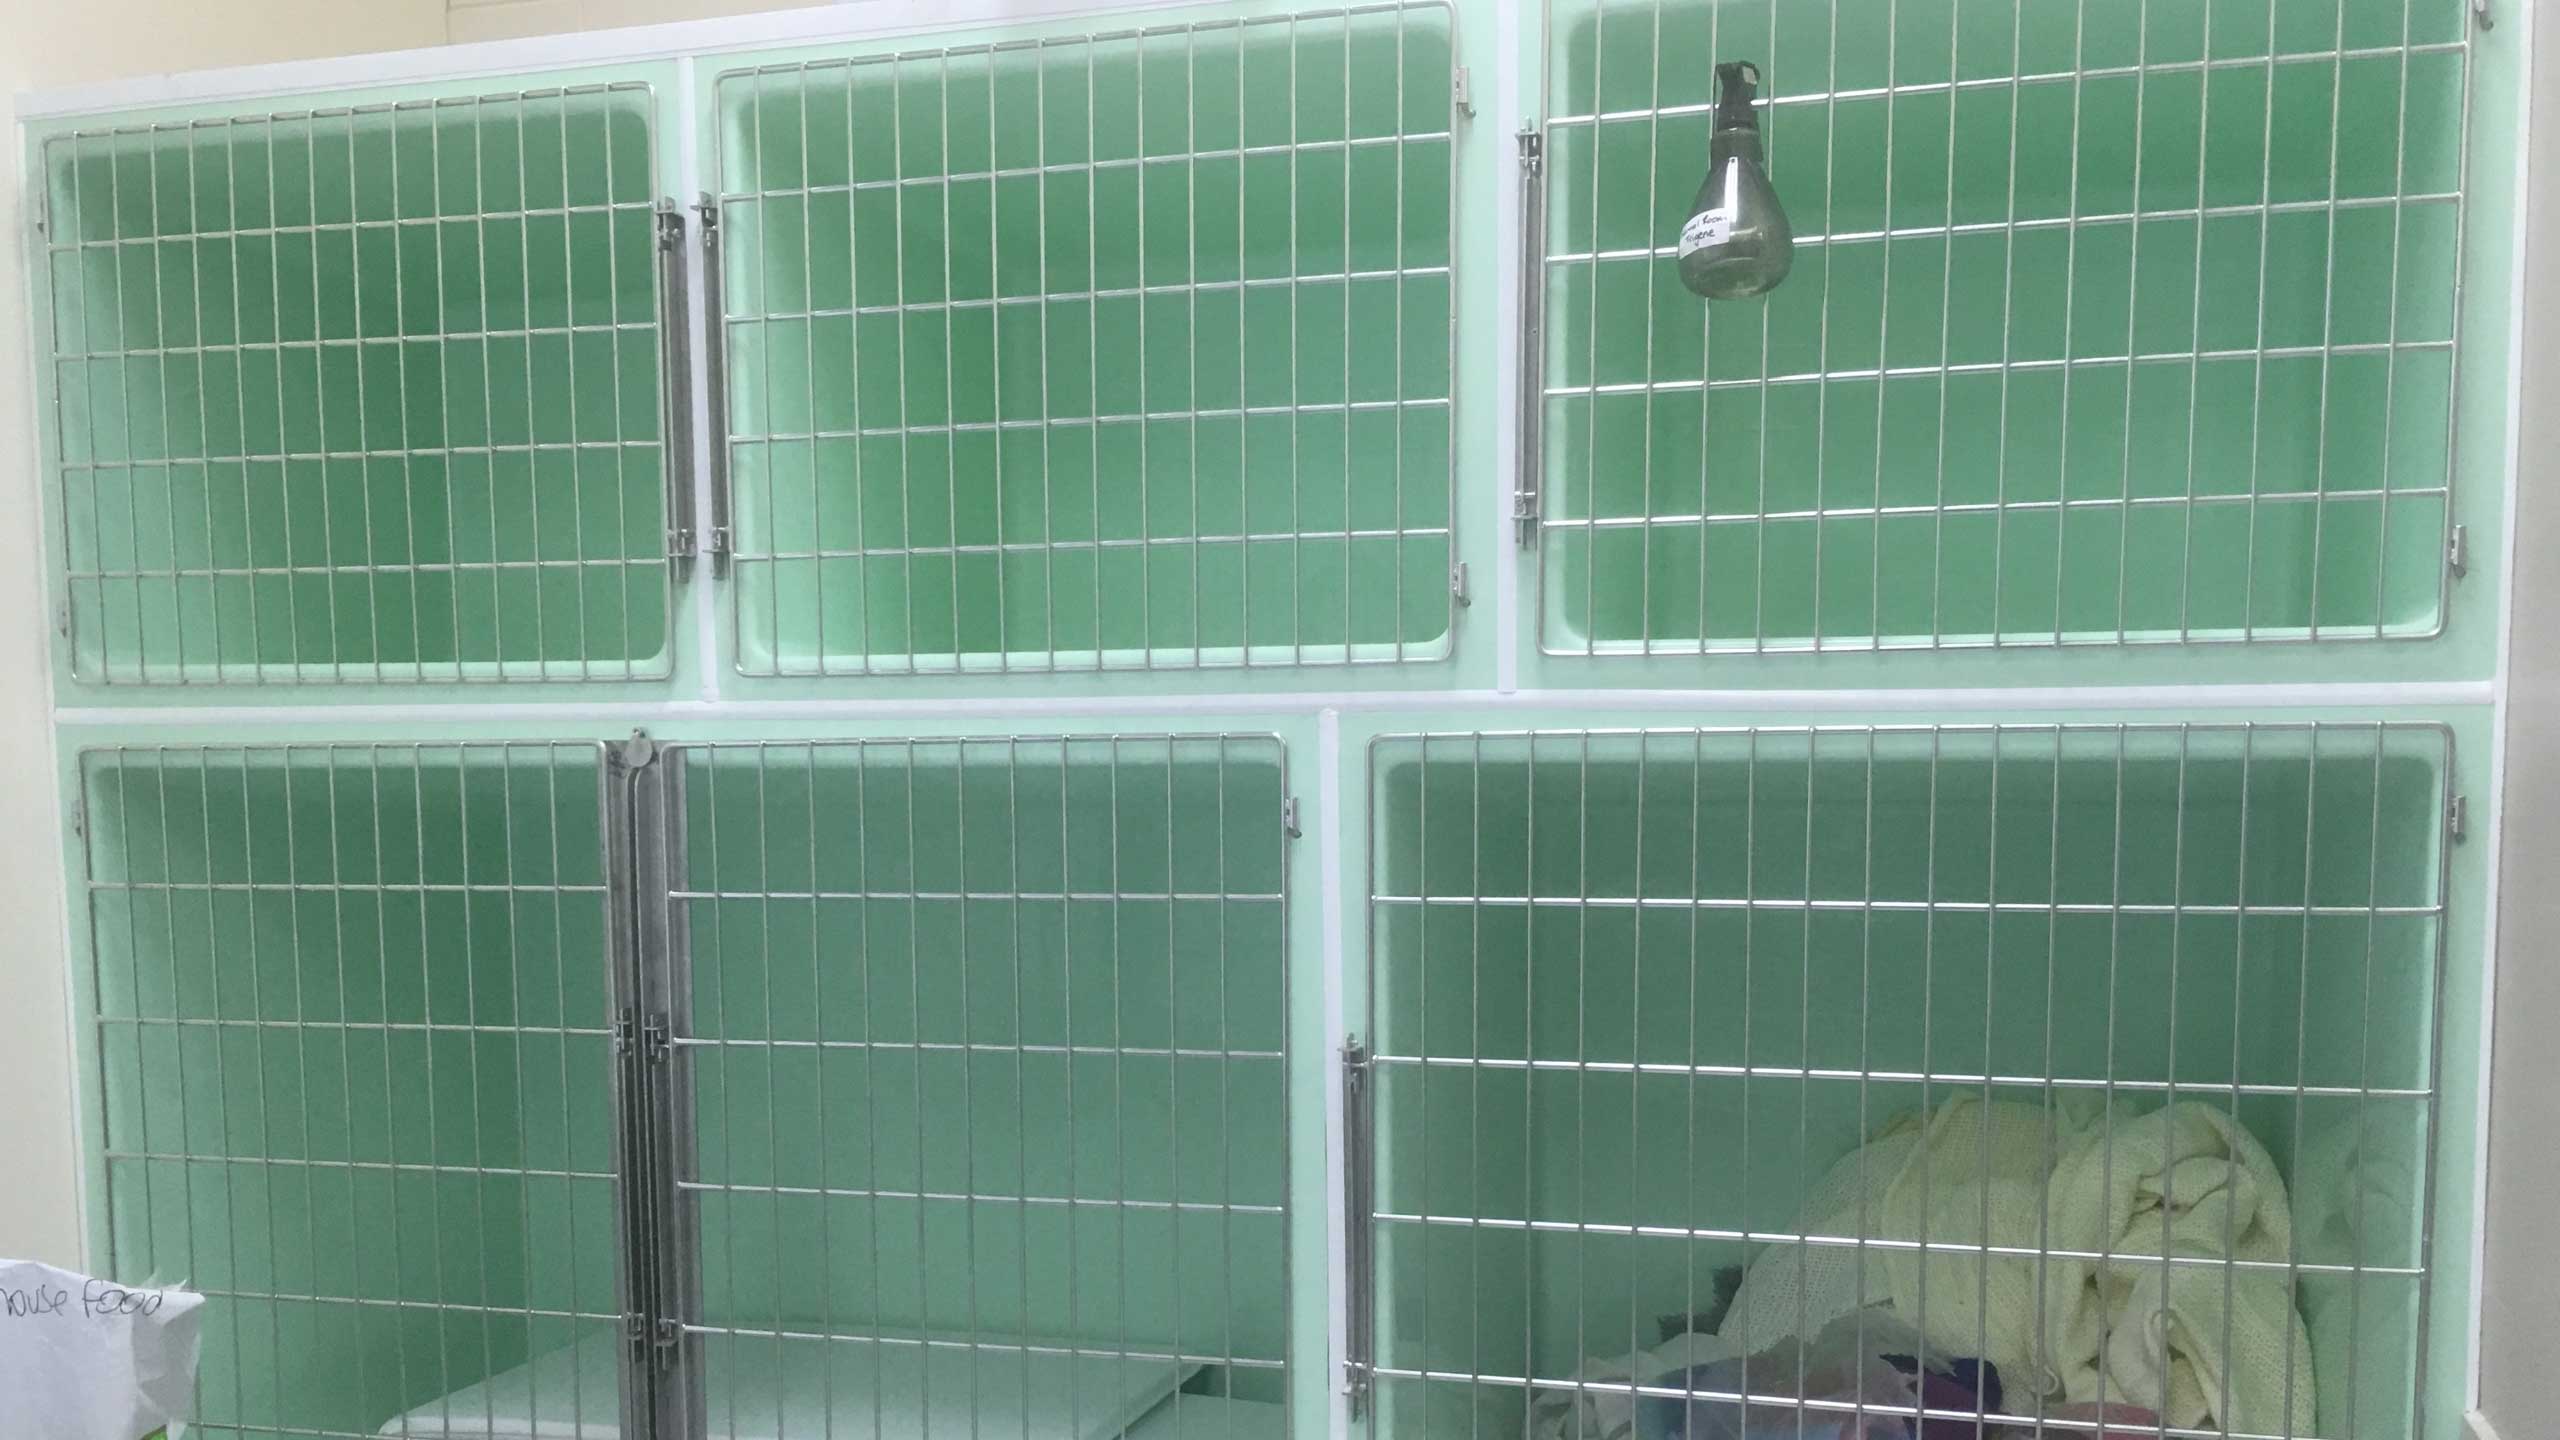 Creature Comfort Cages cage bank: 3 x Medium Dog Cages (top), 1 x Double Wide Dog Cage + 1 x Large Dog Cage (bottom)